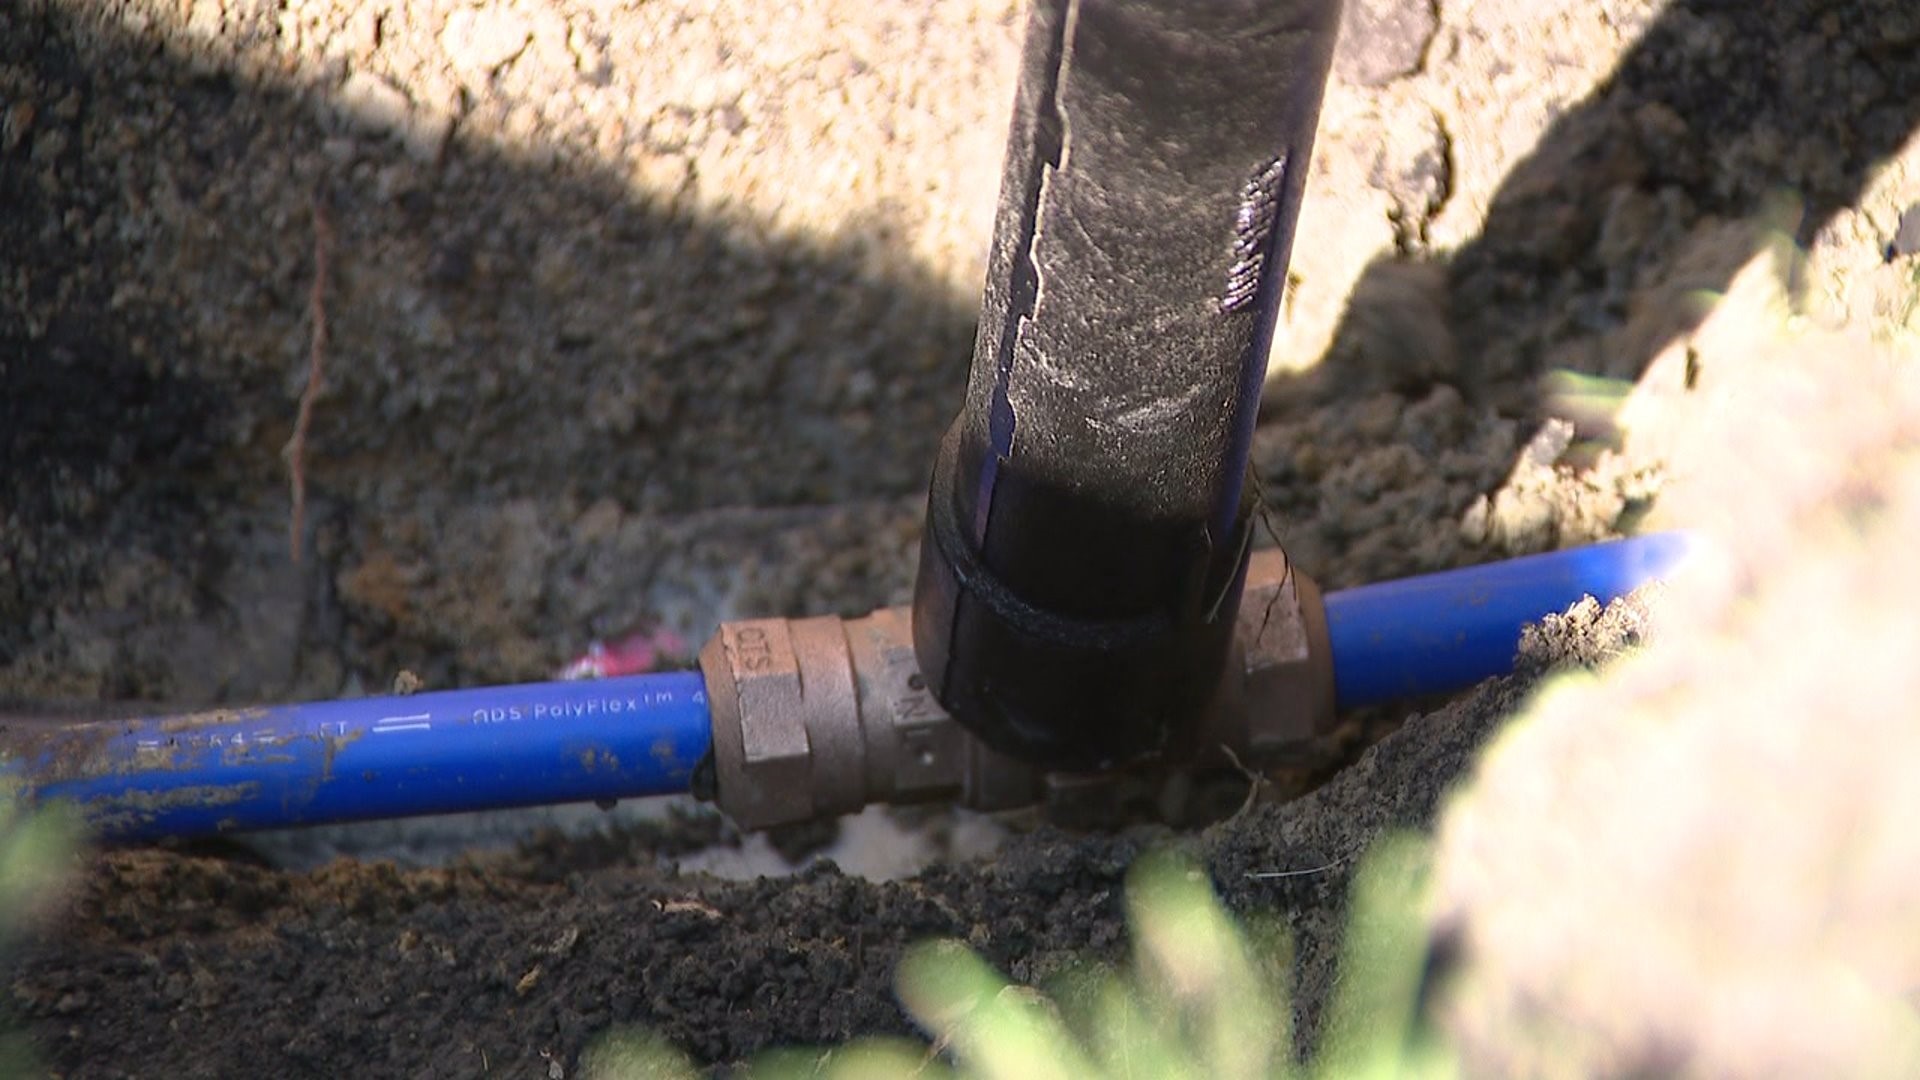 Lead service lines being replaced in Galesburg